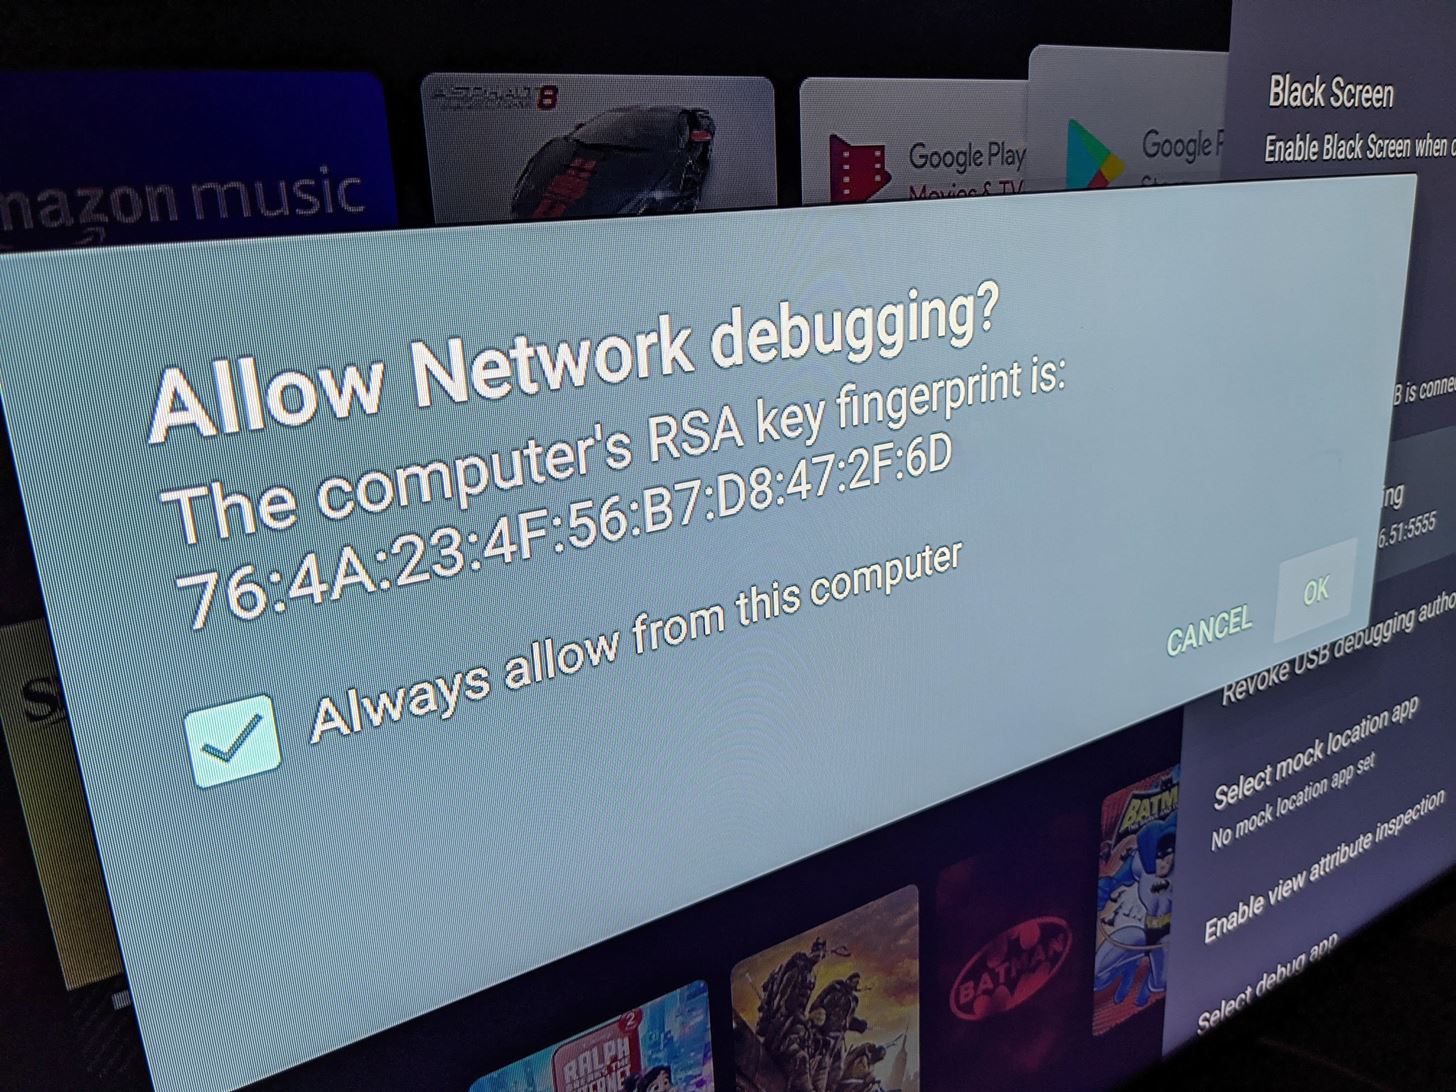 How to Get the New Google TV UI on Android TV — Nvidia Shield, Mi Box, Sony & More